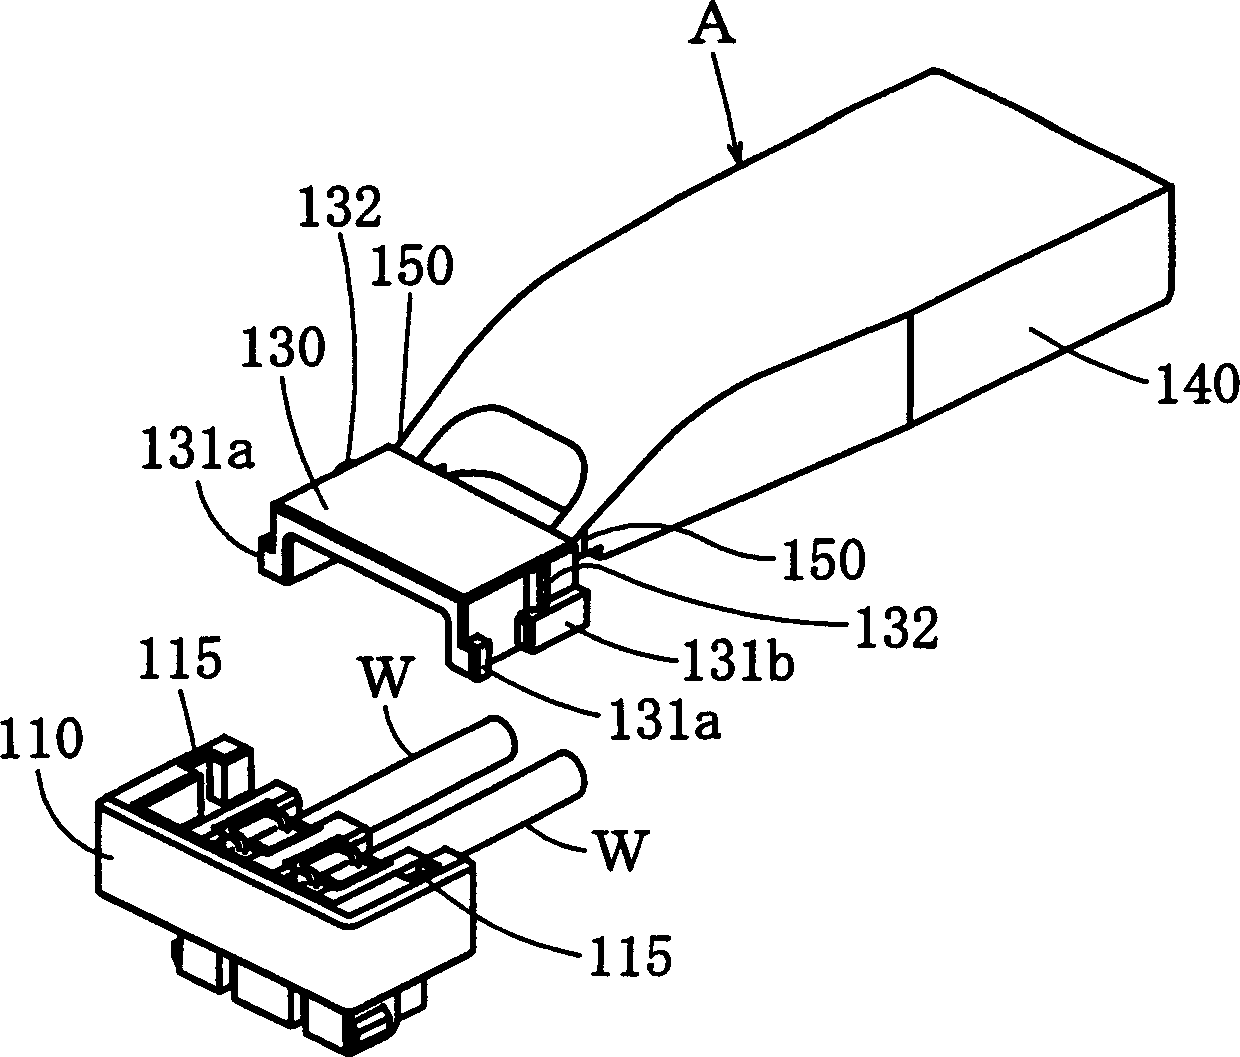 A connector housing assembly and an electric connector assembly